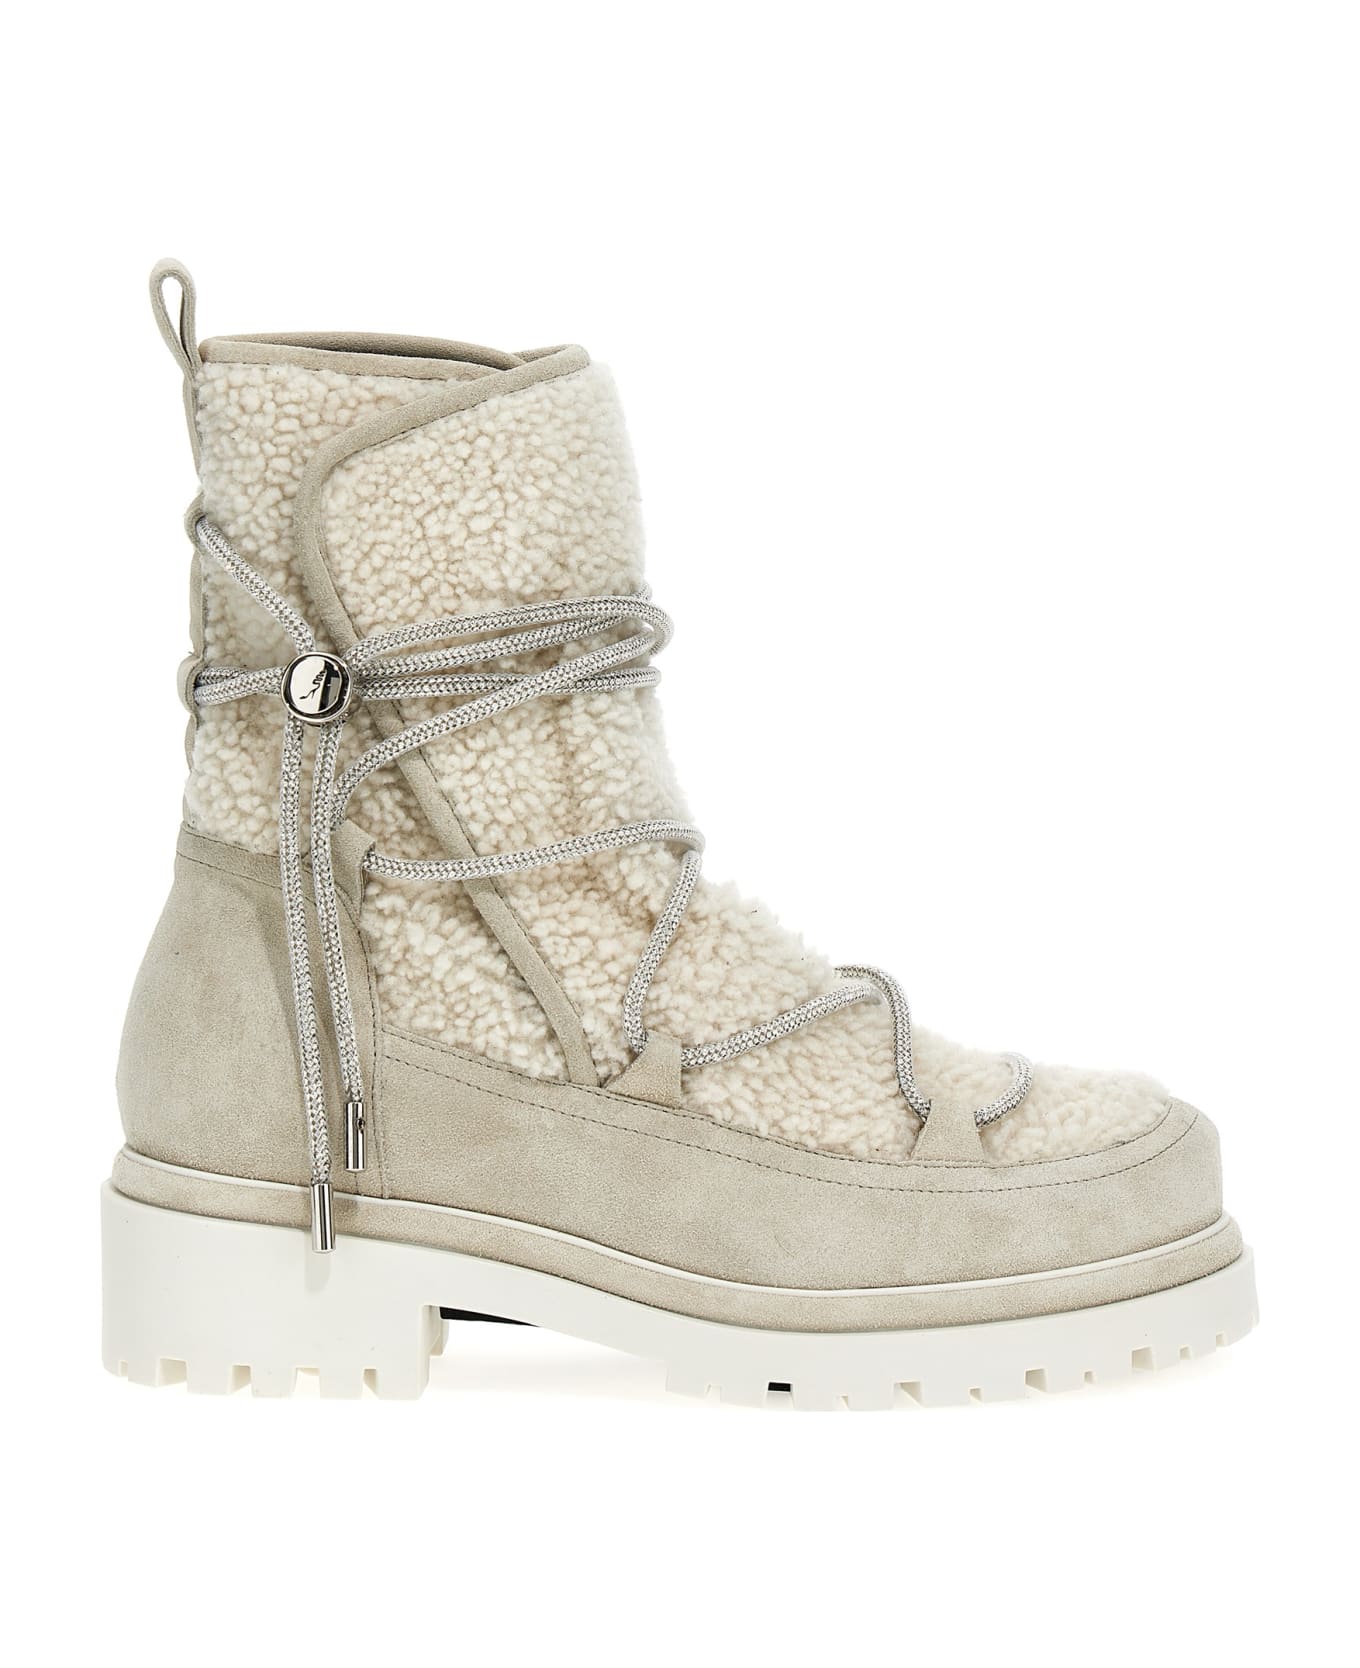 René Caovilla Suede Shearling Ankle Boots - White